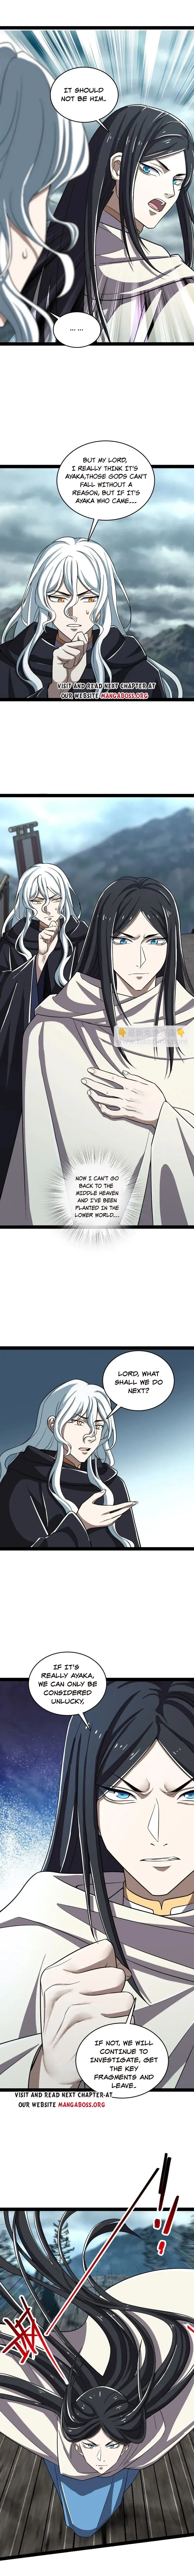 Life of a War Emperor After Retirement Chapter 235 page 2